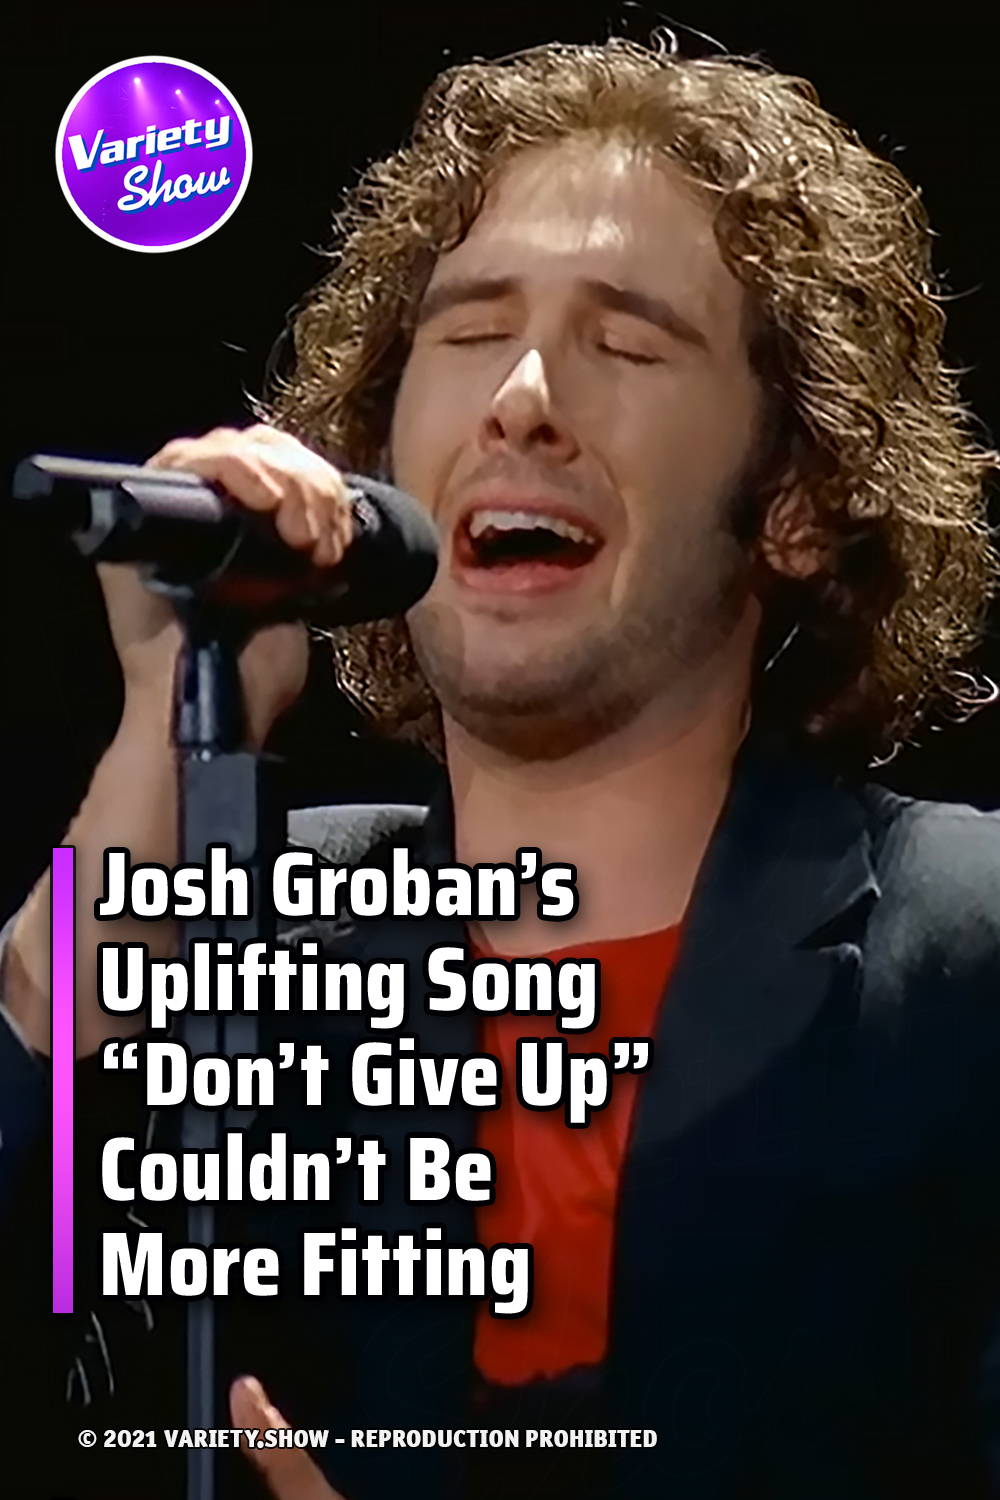 Josh Groban’s Uplifting Song “Don’t Give Up” Couldn’t Be More Fitting